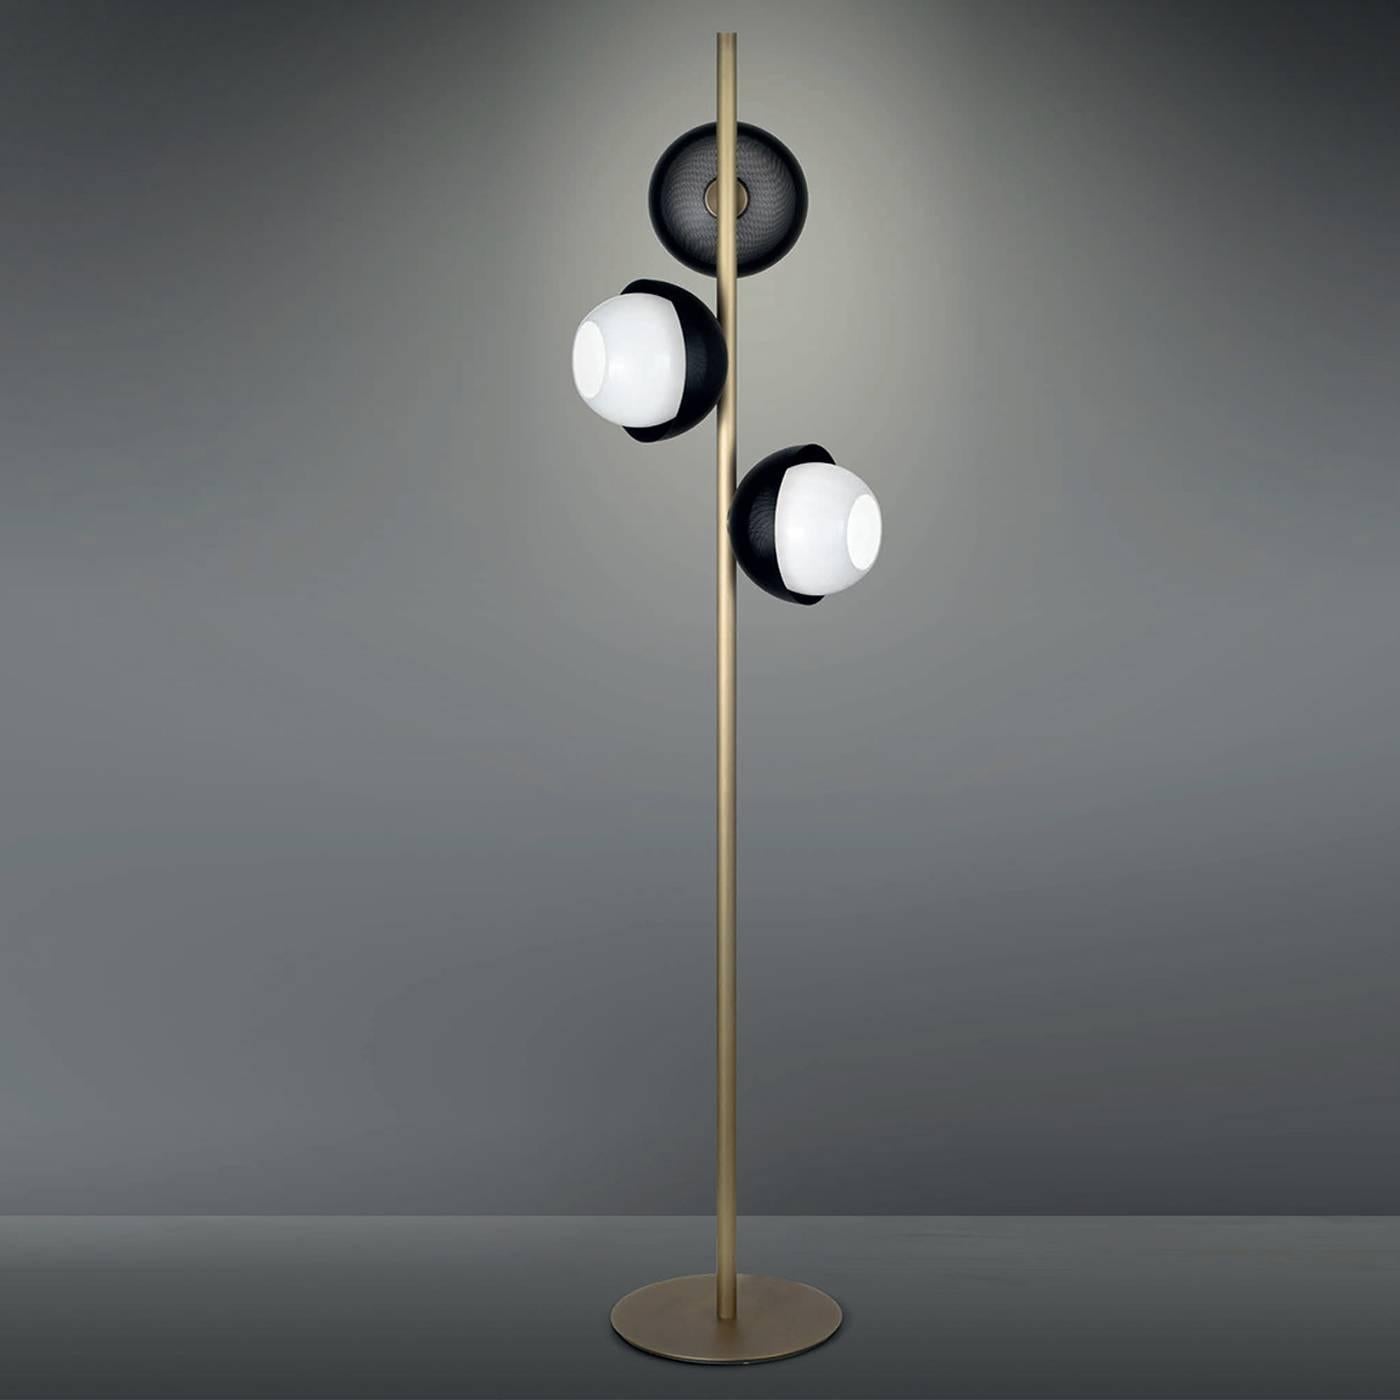 This striking floor lamp features a minimalist shaft in brass, which can have a light or dark burnished brass finish, resting on a round base of the same material and finish. The three shades that stem from the top face different directions creating